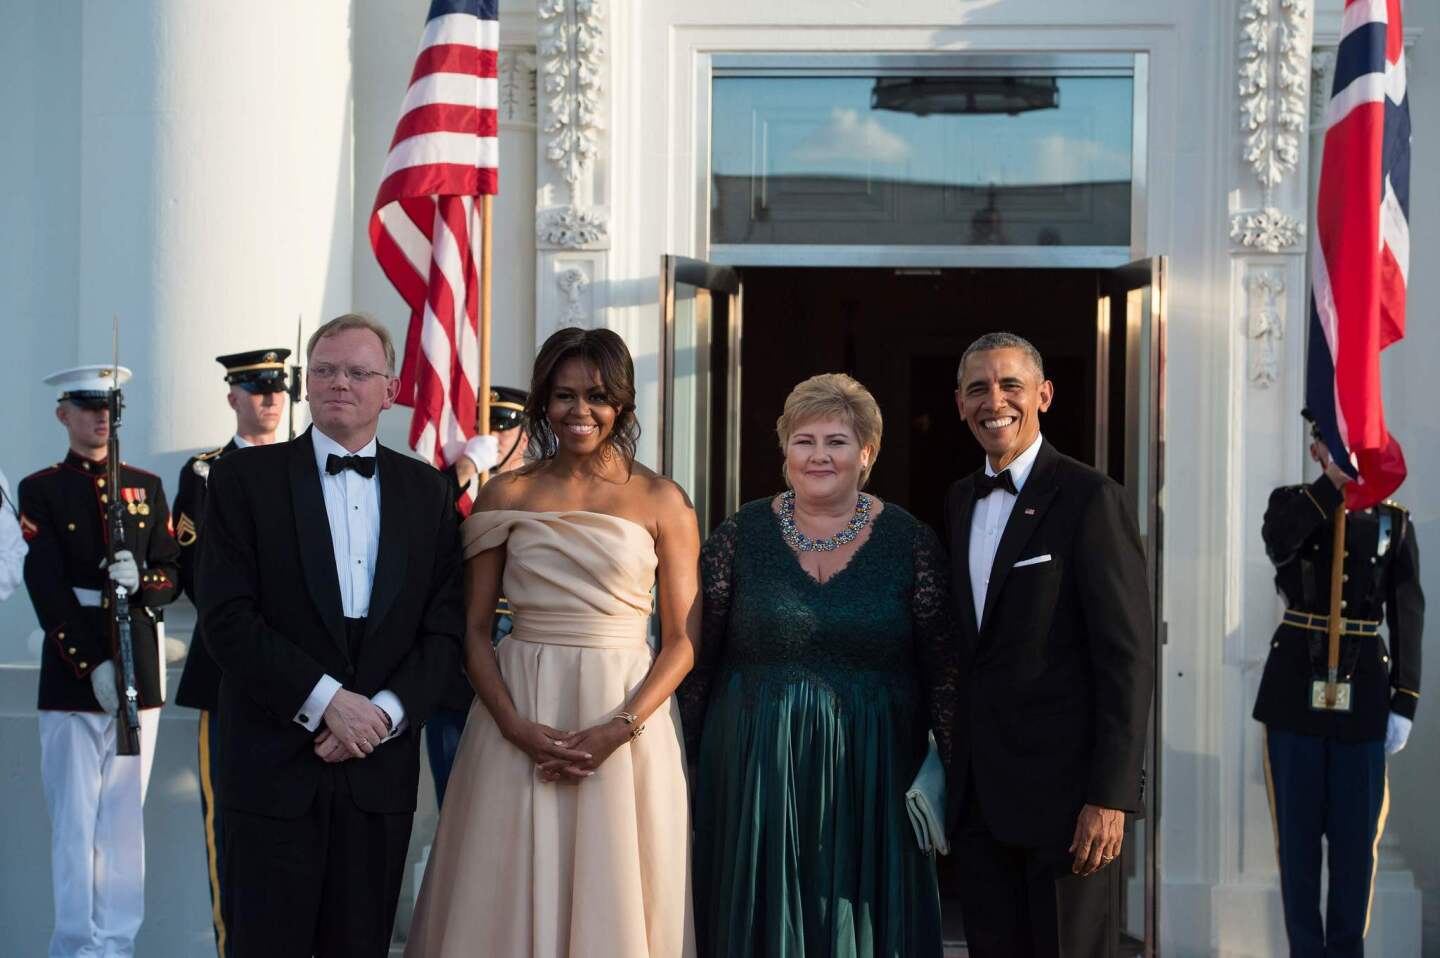 Norwegian Prime Minister Erna Solberg, right, and her husband Sindre Finnes pose for a photo with President Obama and First Lady Michelle Obama at the White House on May 13, 2016.